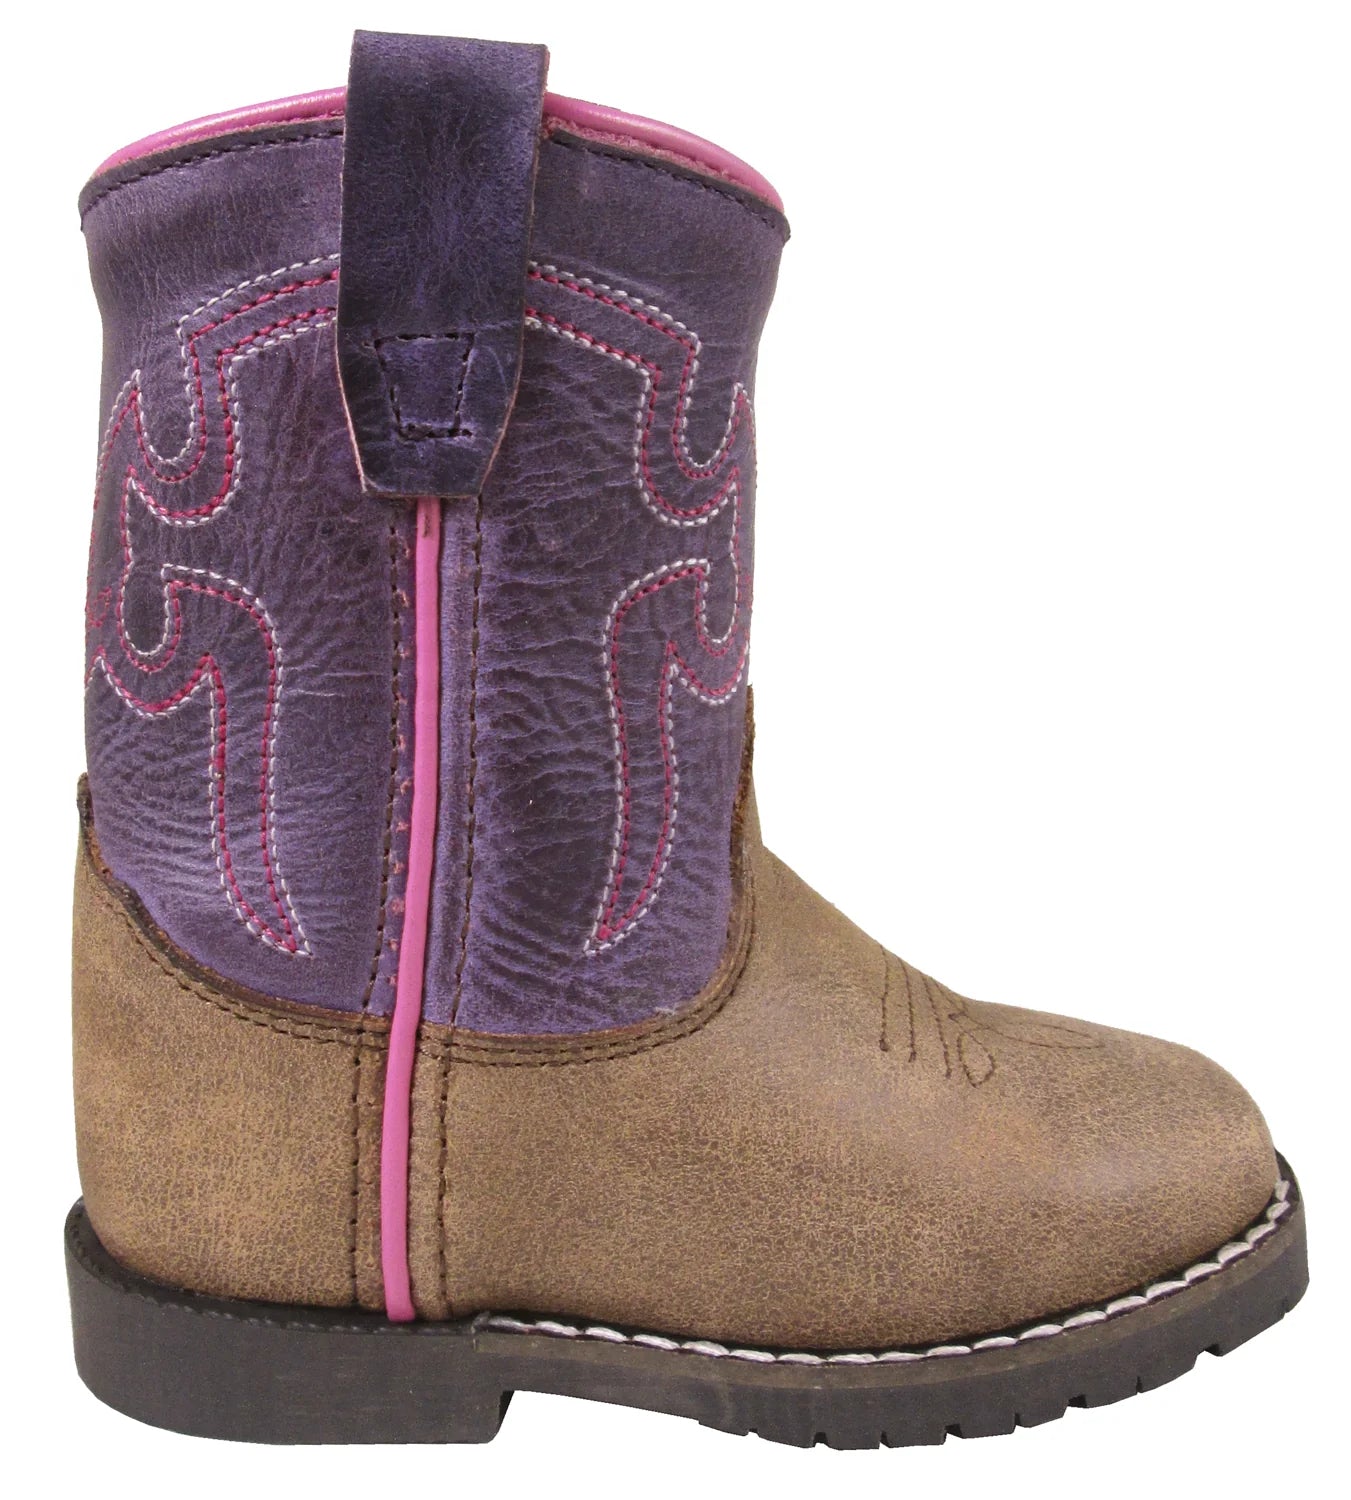 Smoky Mountain Infant Toddler Brown & Purple Boot STYLE 3123T